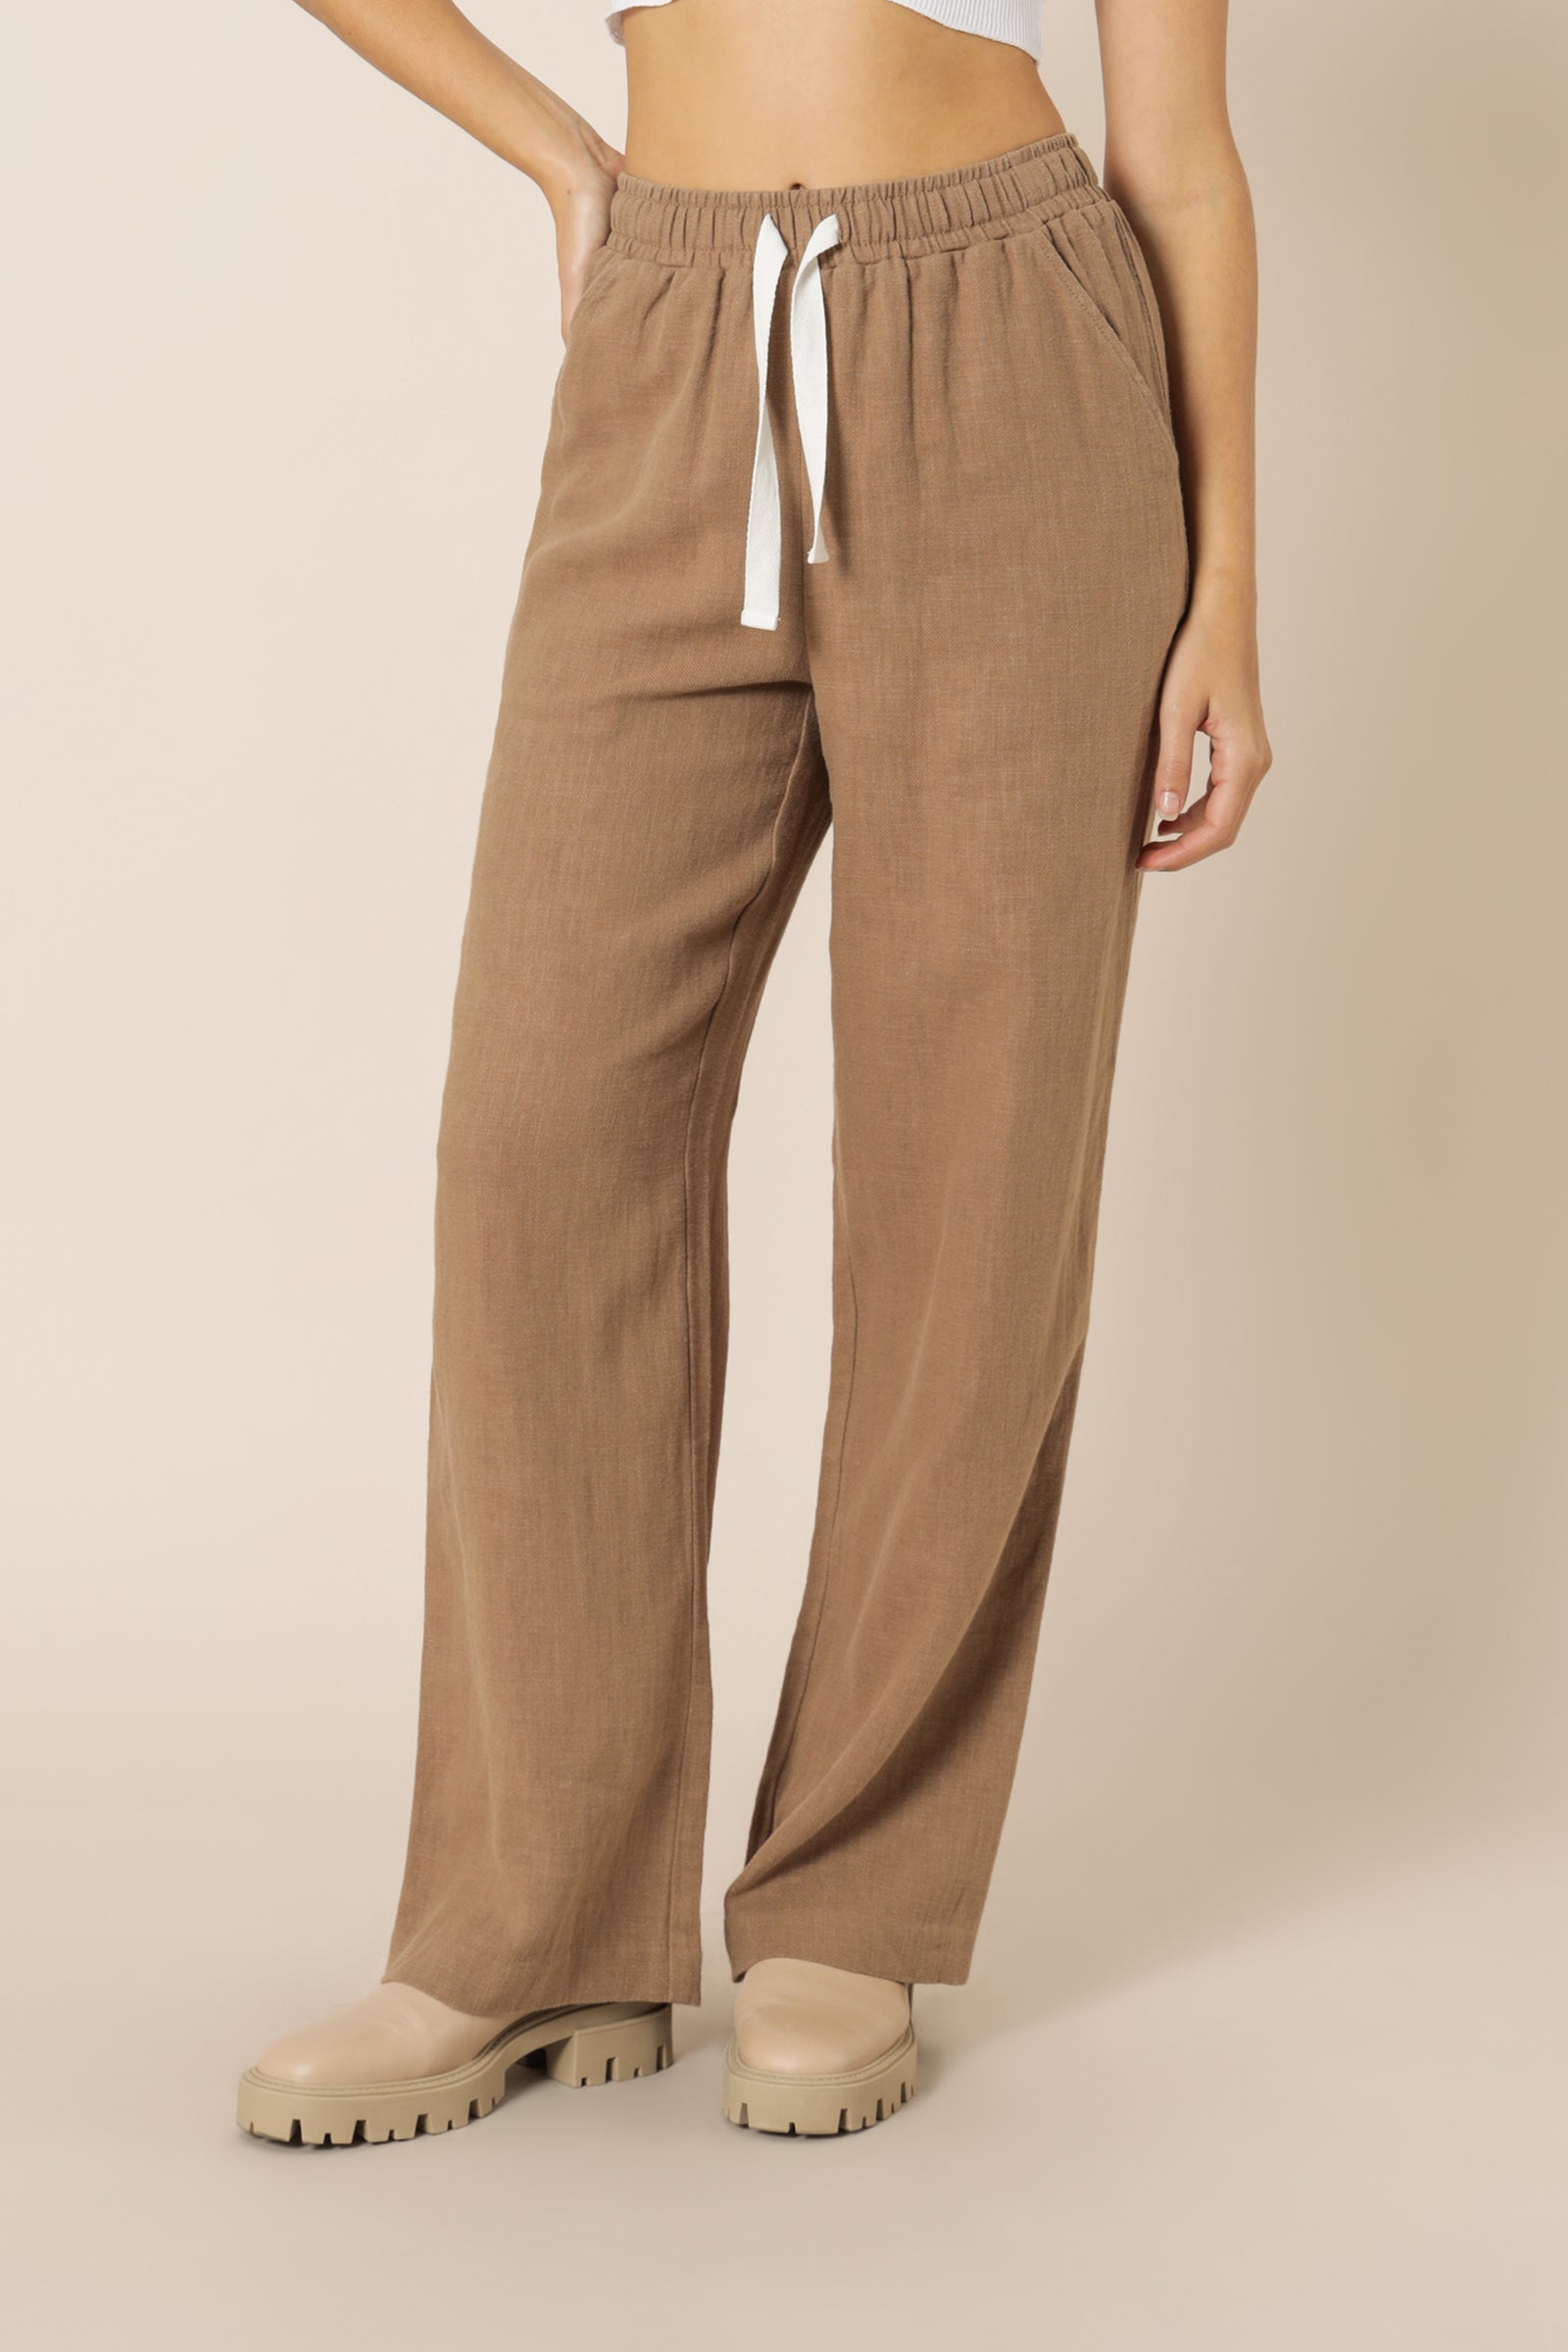 Nude Lucy marvin wide leg pant coffee pants